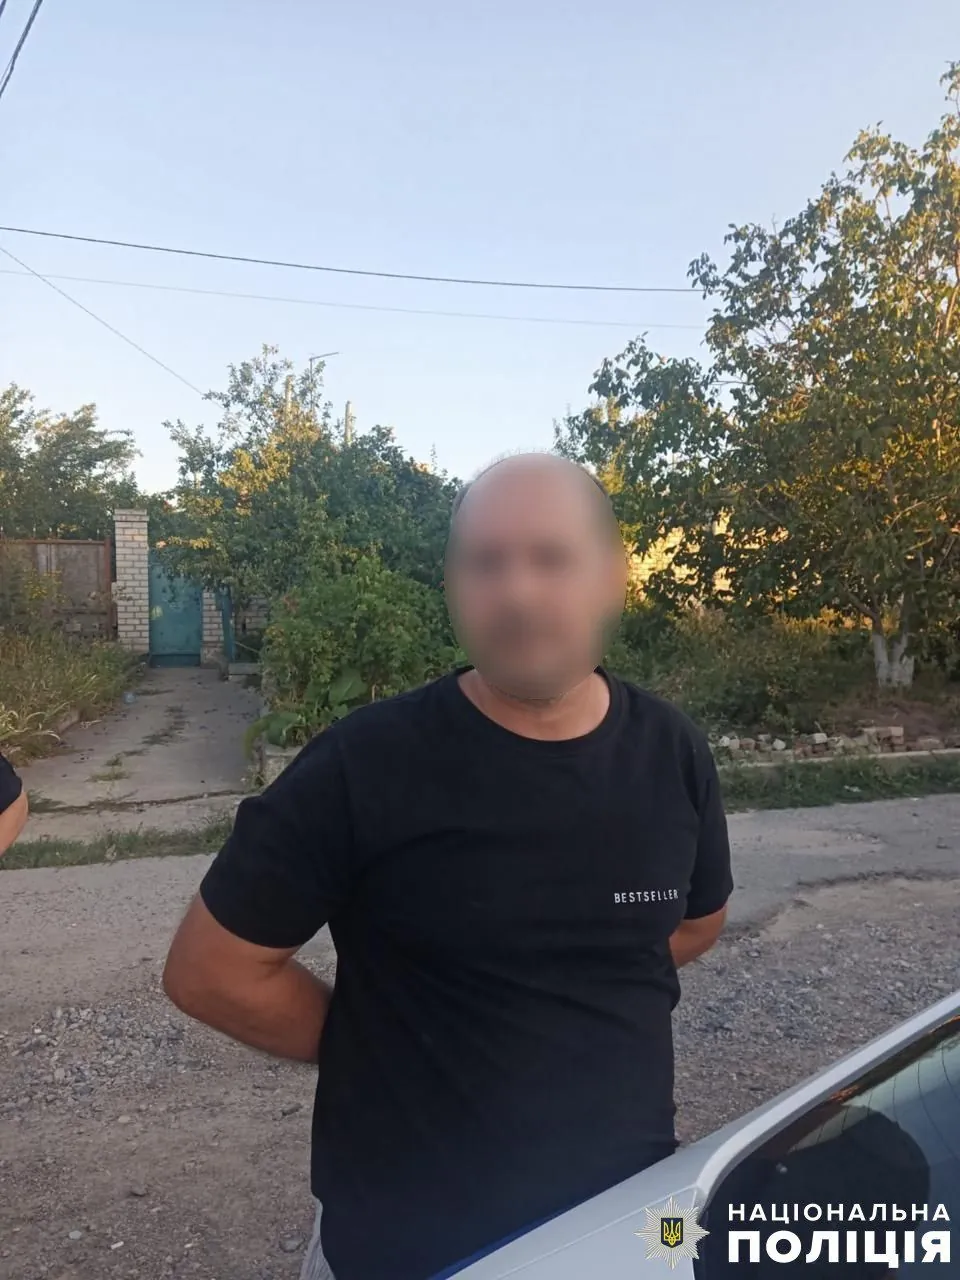 In Kherson, a man throws a grenade near a store: one dead and one wounded